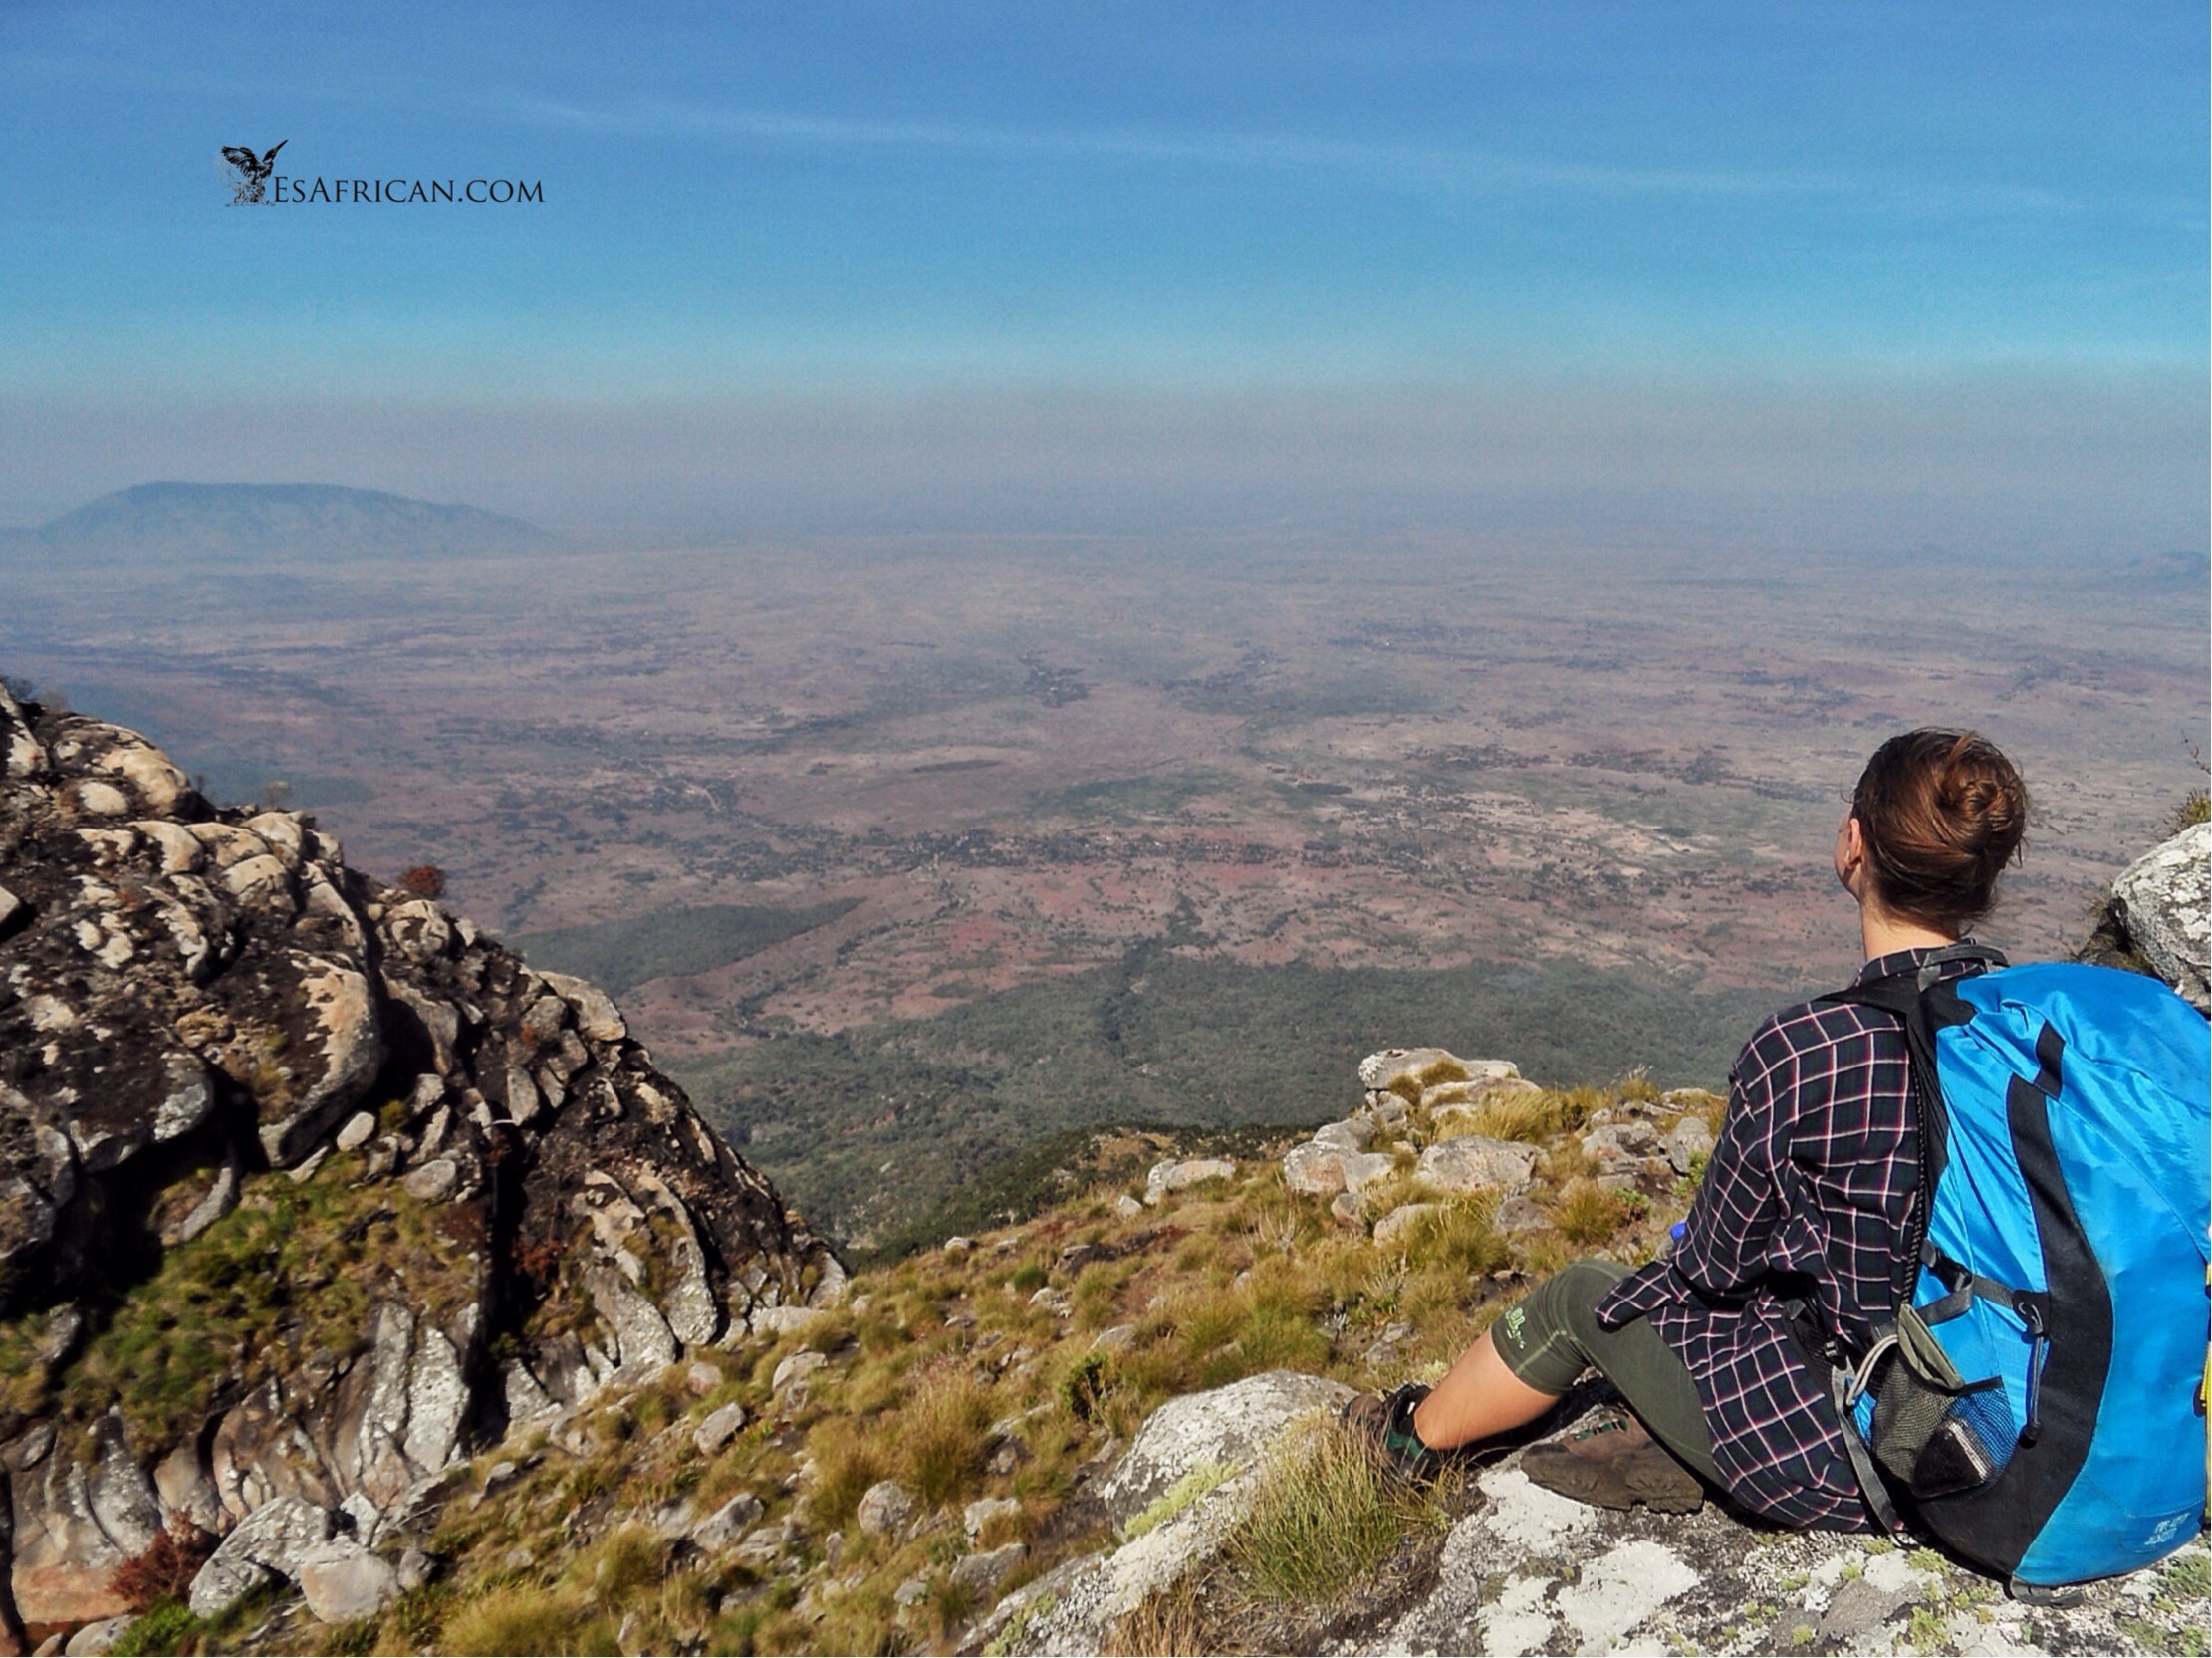 Mulanje Mountain: viewing the world below from the peace and tranquility of the plateau edge is the ideal place and time for reflecting on why things can different in different places.